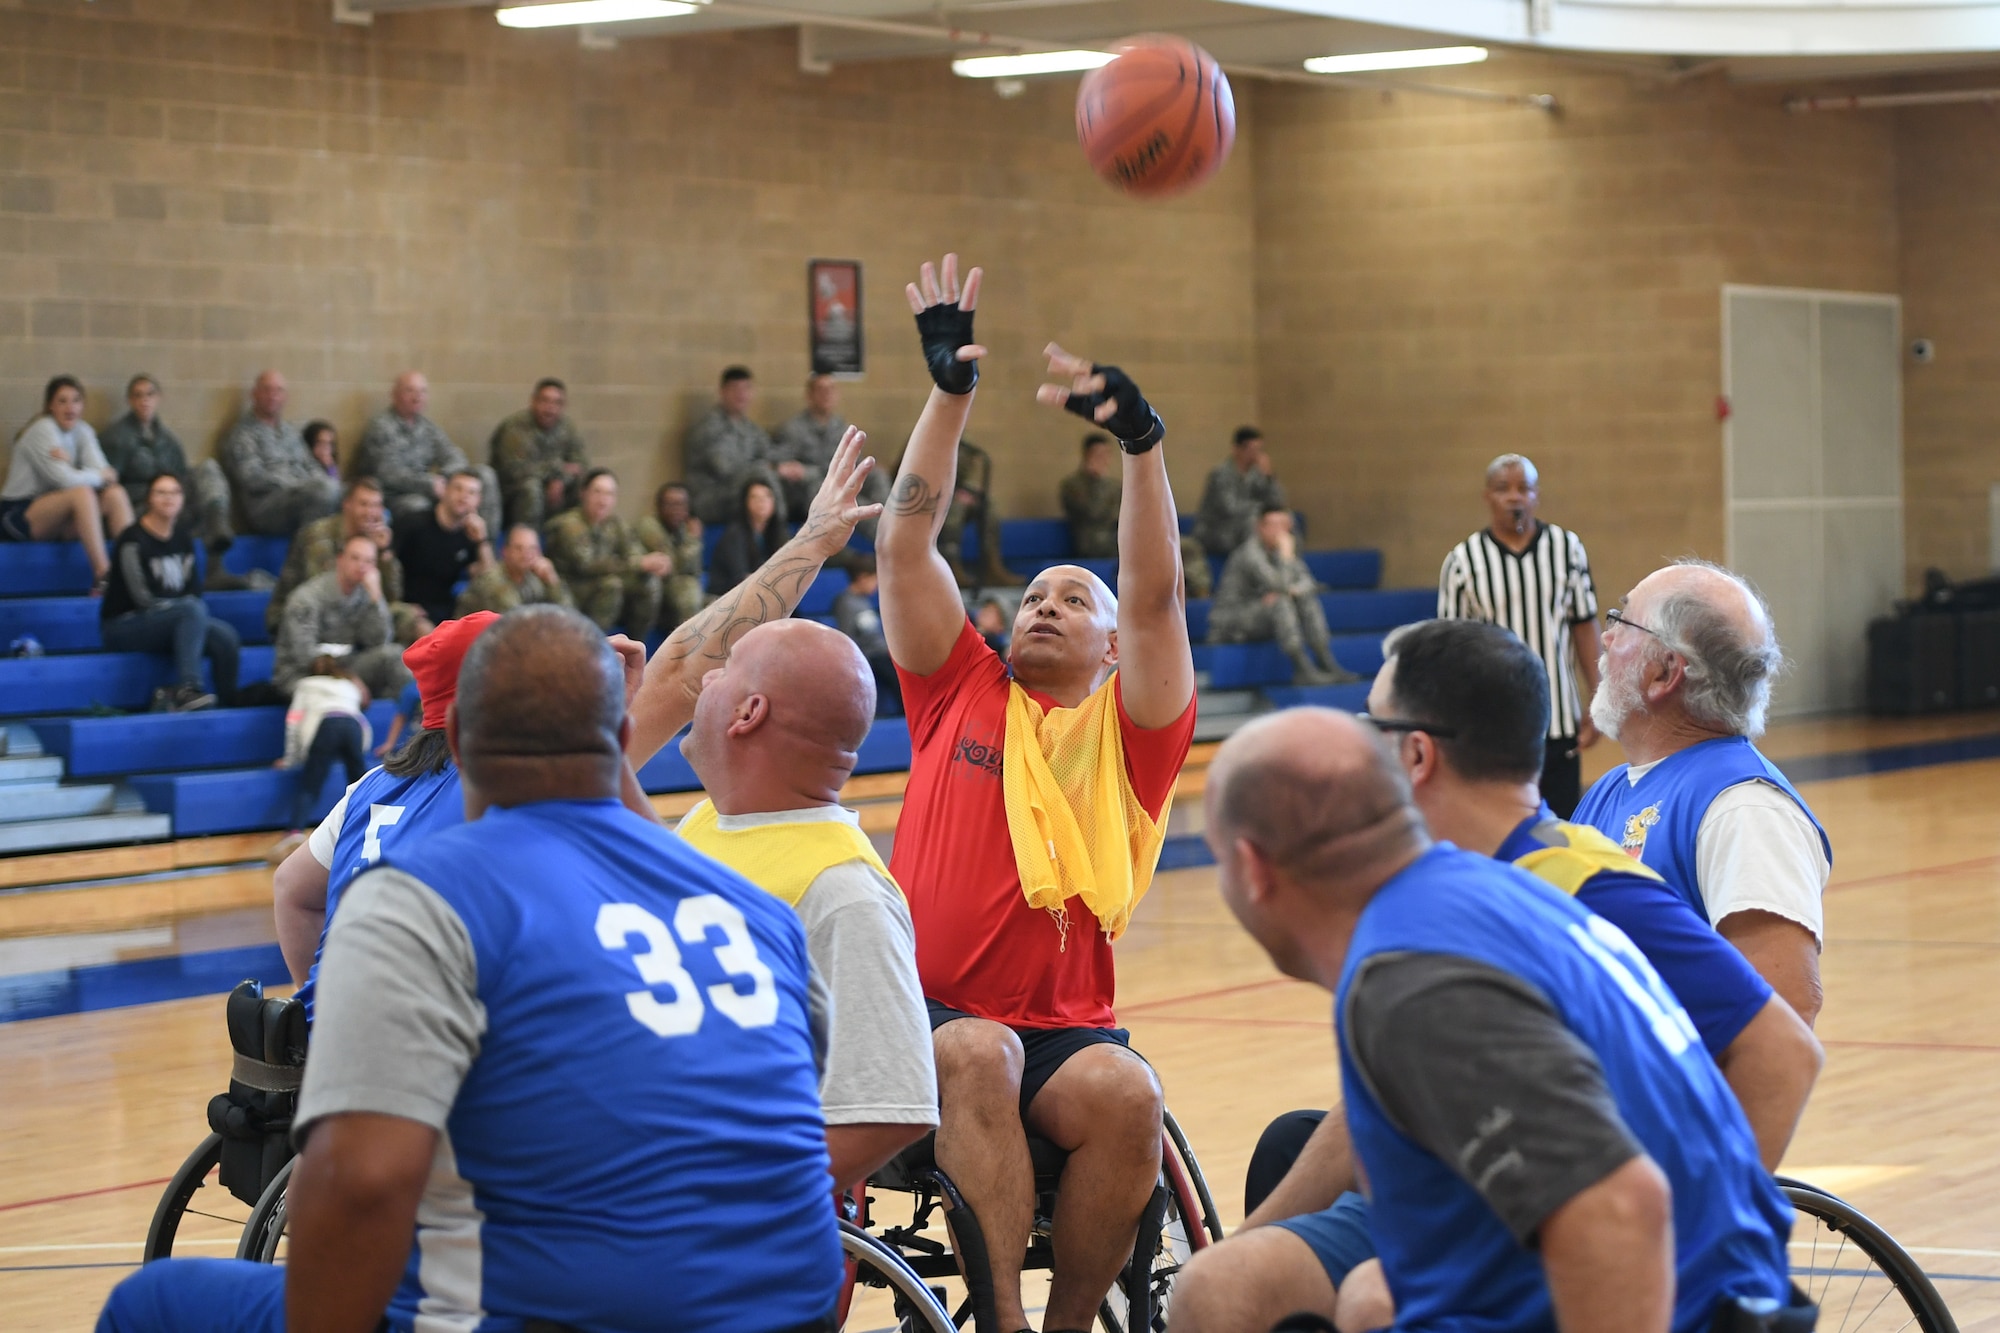 A member from Team Hill shoots the ball during a wheelchair basketball game Oct. 9, 2019 at Hill Air Force Base, Utah. Leaders from Hill's units faced off against the Ogden Wheelin' Wildcats, a semi-professional wheelchair basketball team, to celebrate National Disability Employment Awareness Month. (U.S. Air Force photo by Cynthia Griggs)